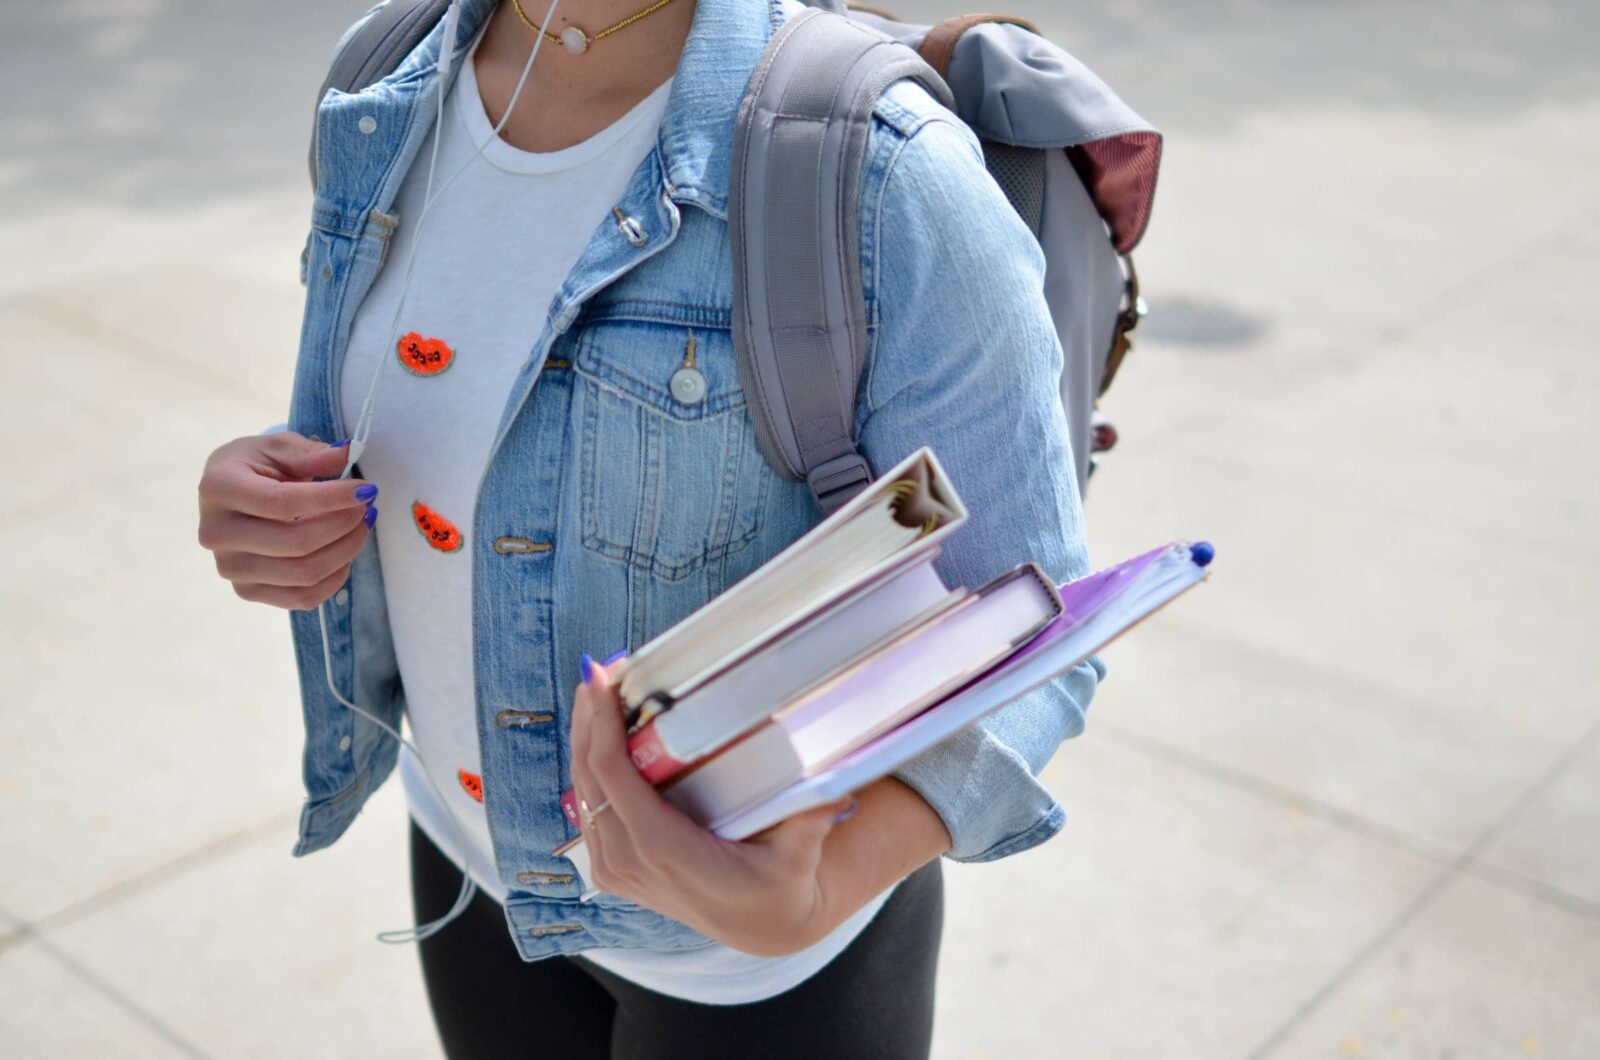 Student with books walking on campus